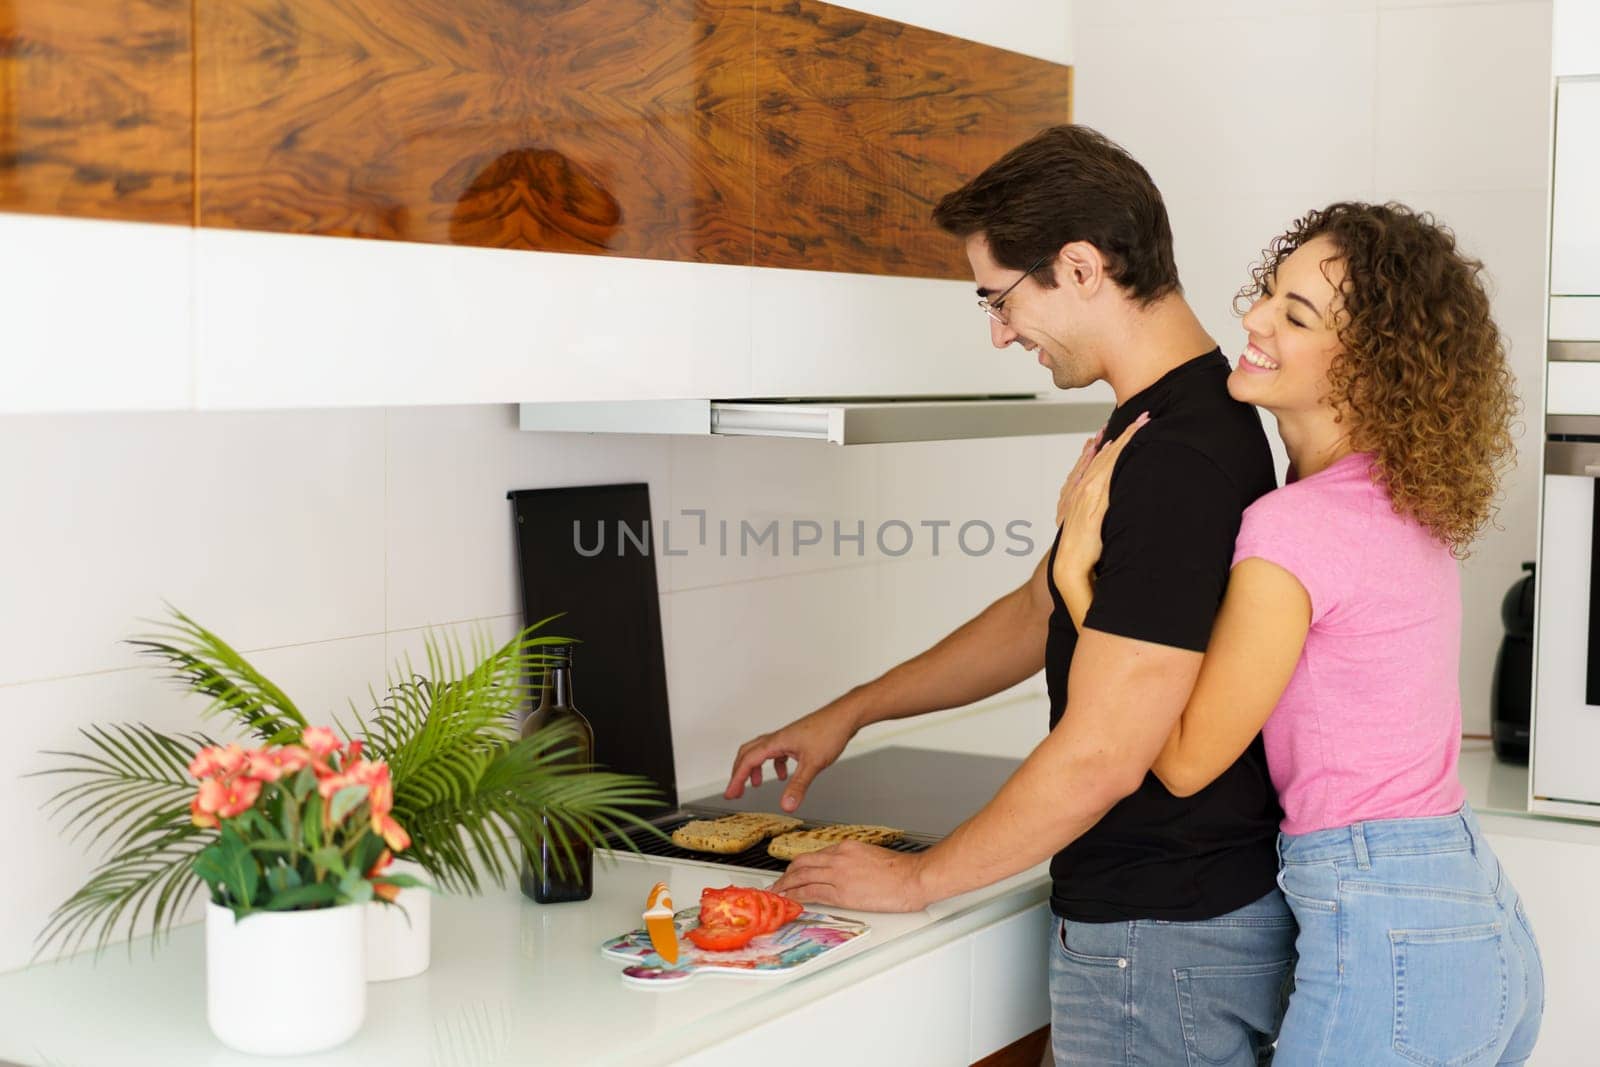 Side view of happy adult couple while standing near cooking range smiling looking down male in eyeglasses toasting bread slices, on grill and female with eyes closed hugging from behind in daylight